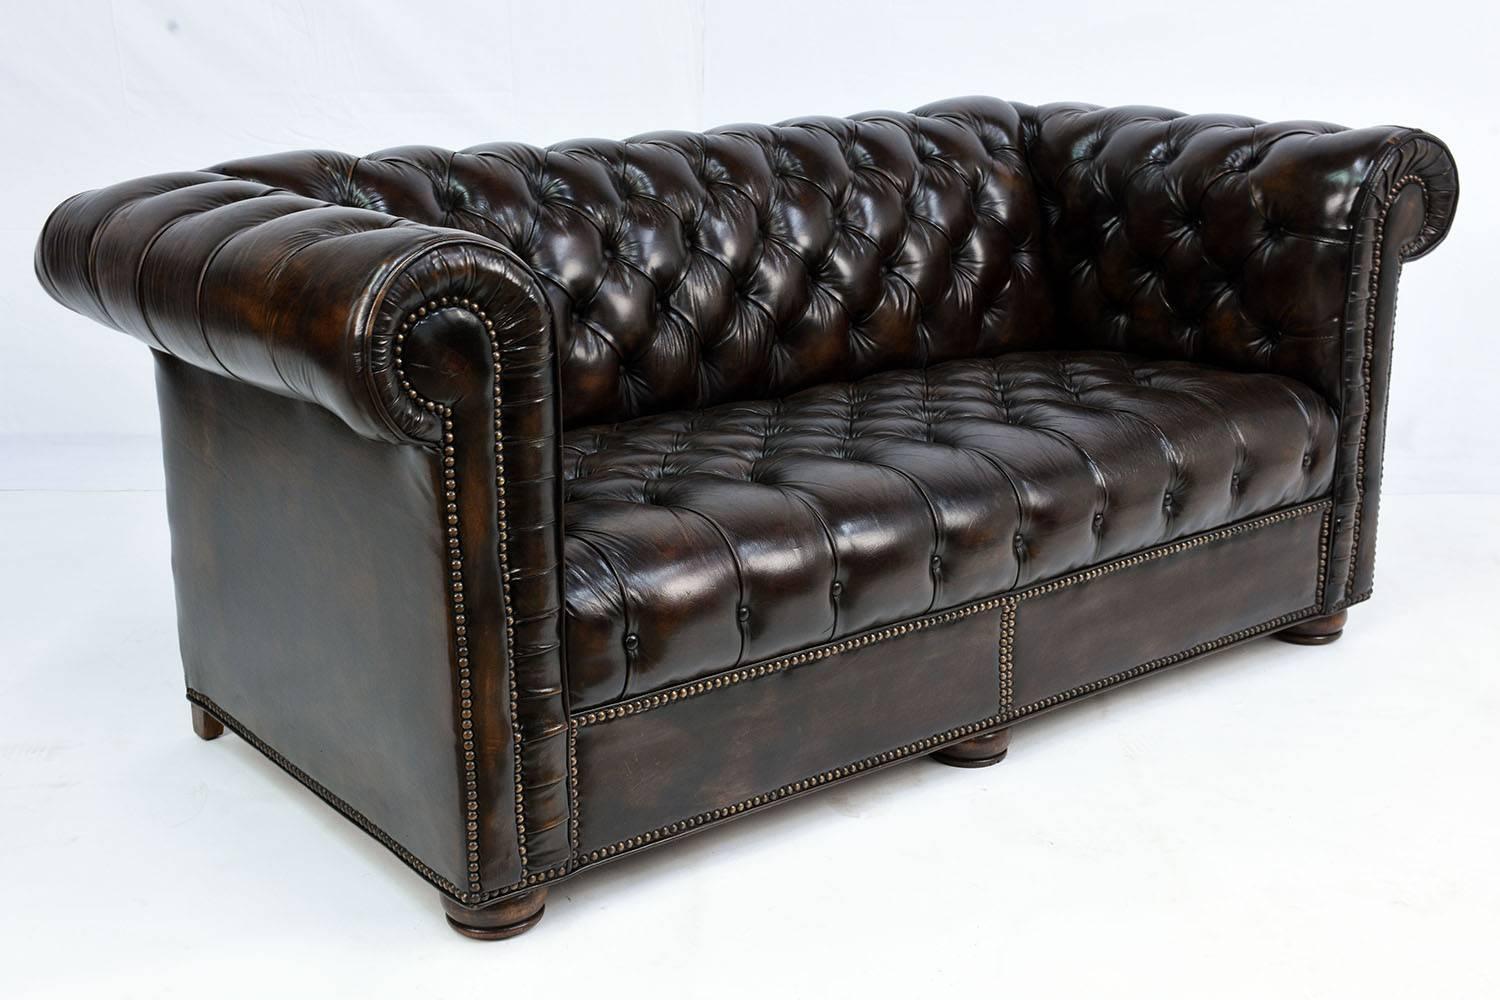 This 1970s vintage Chesterfield style love seat is upholstered in dark brown color leather with a patina finish. The seat, back and arms have elegant tufted details. The edges have brass nailhead decorations and the love seat is finished with round